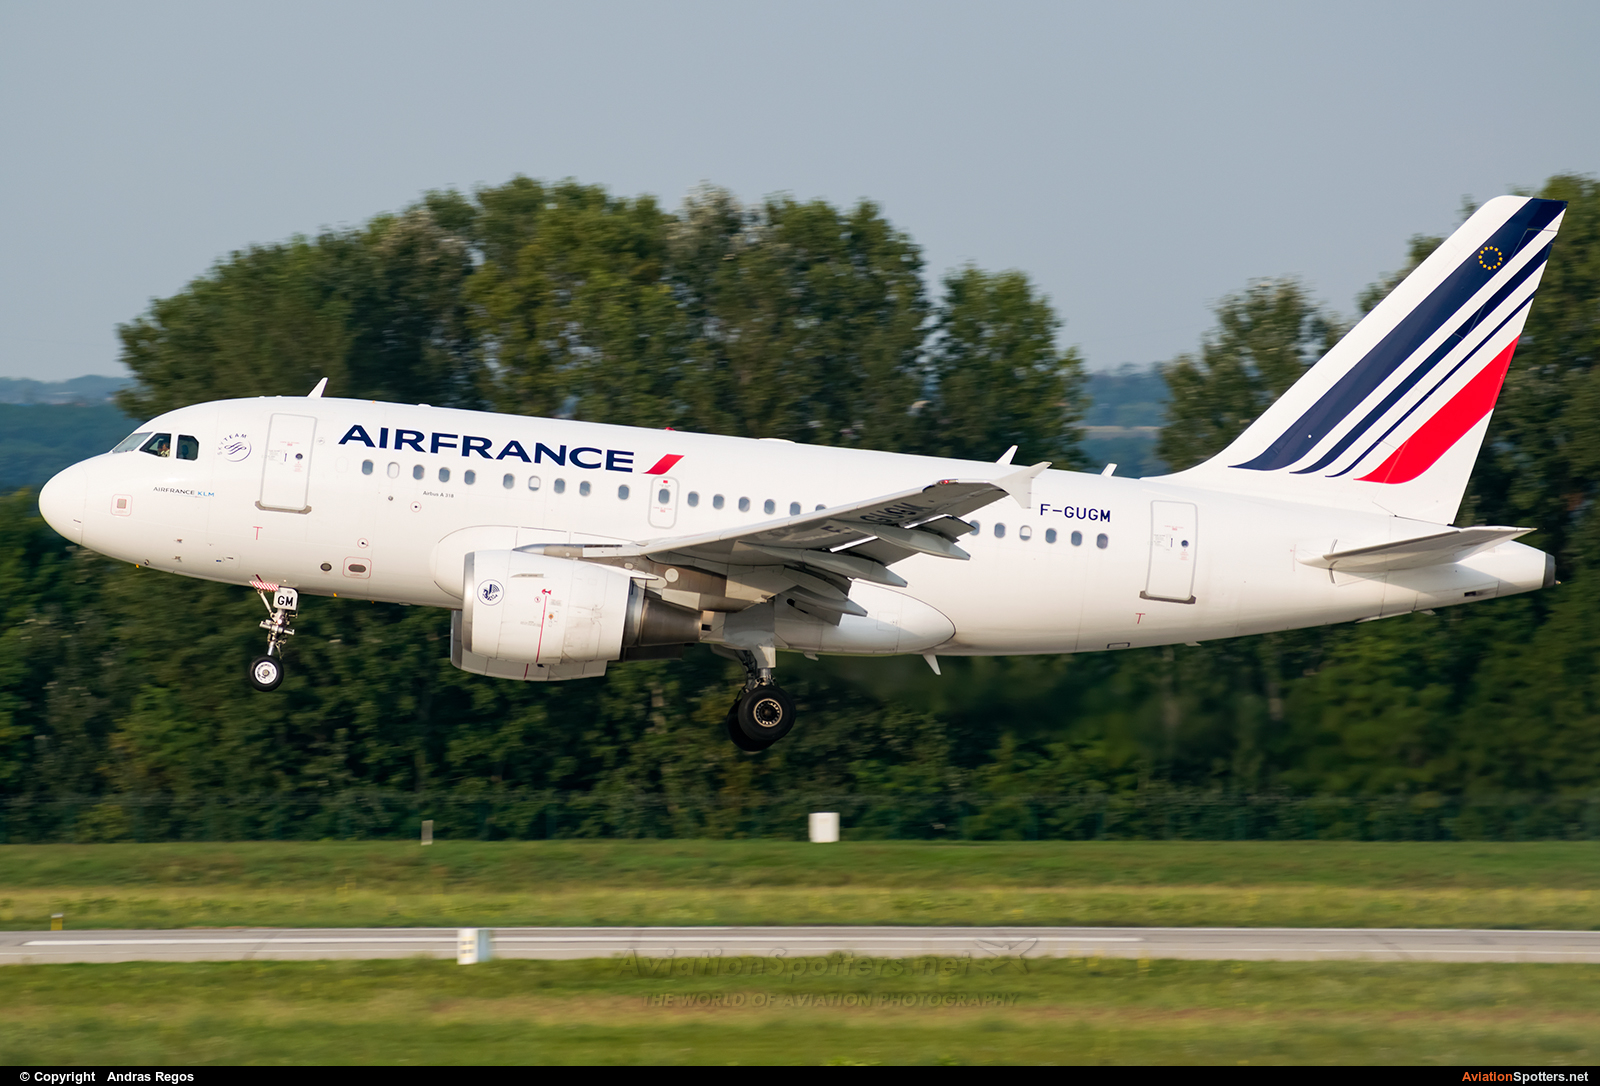 Air France  -  A318  (F-GUGM) By Andras Regos (regos)